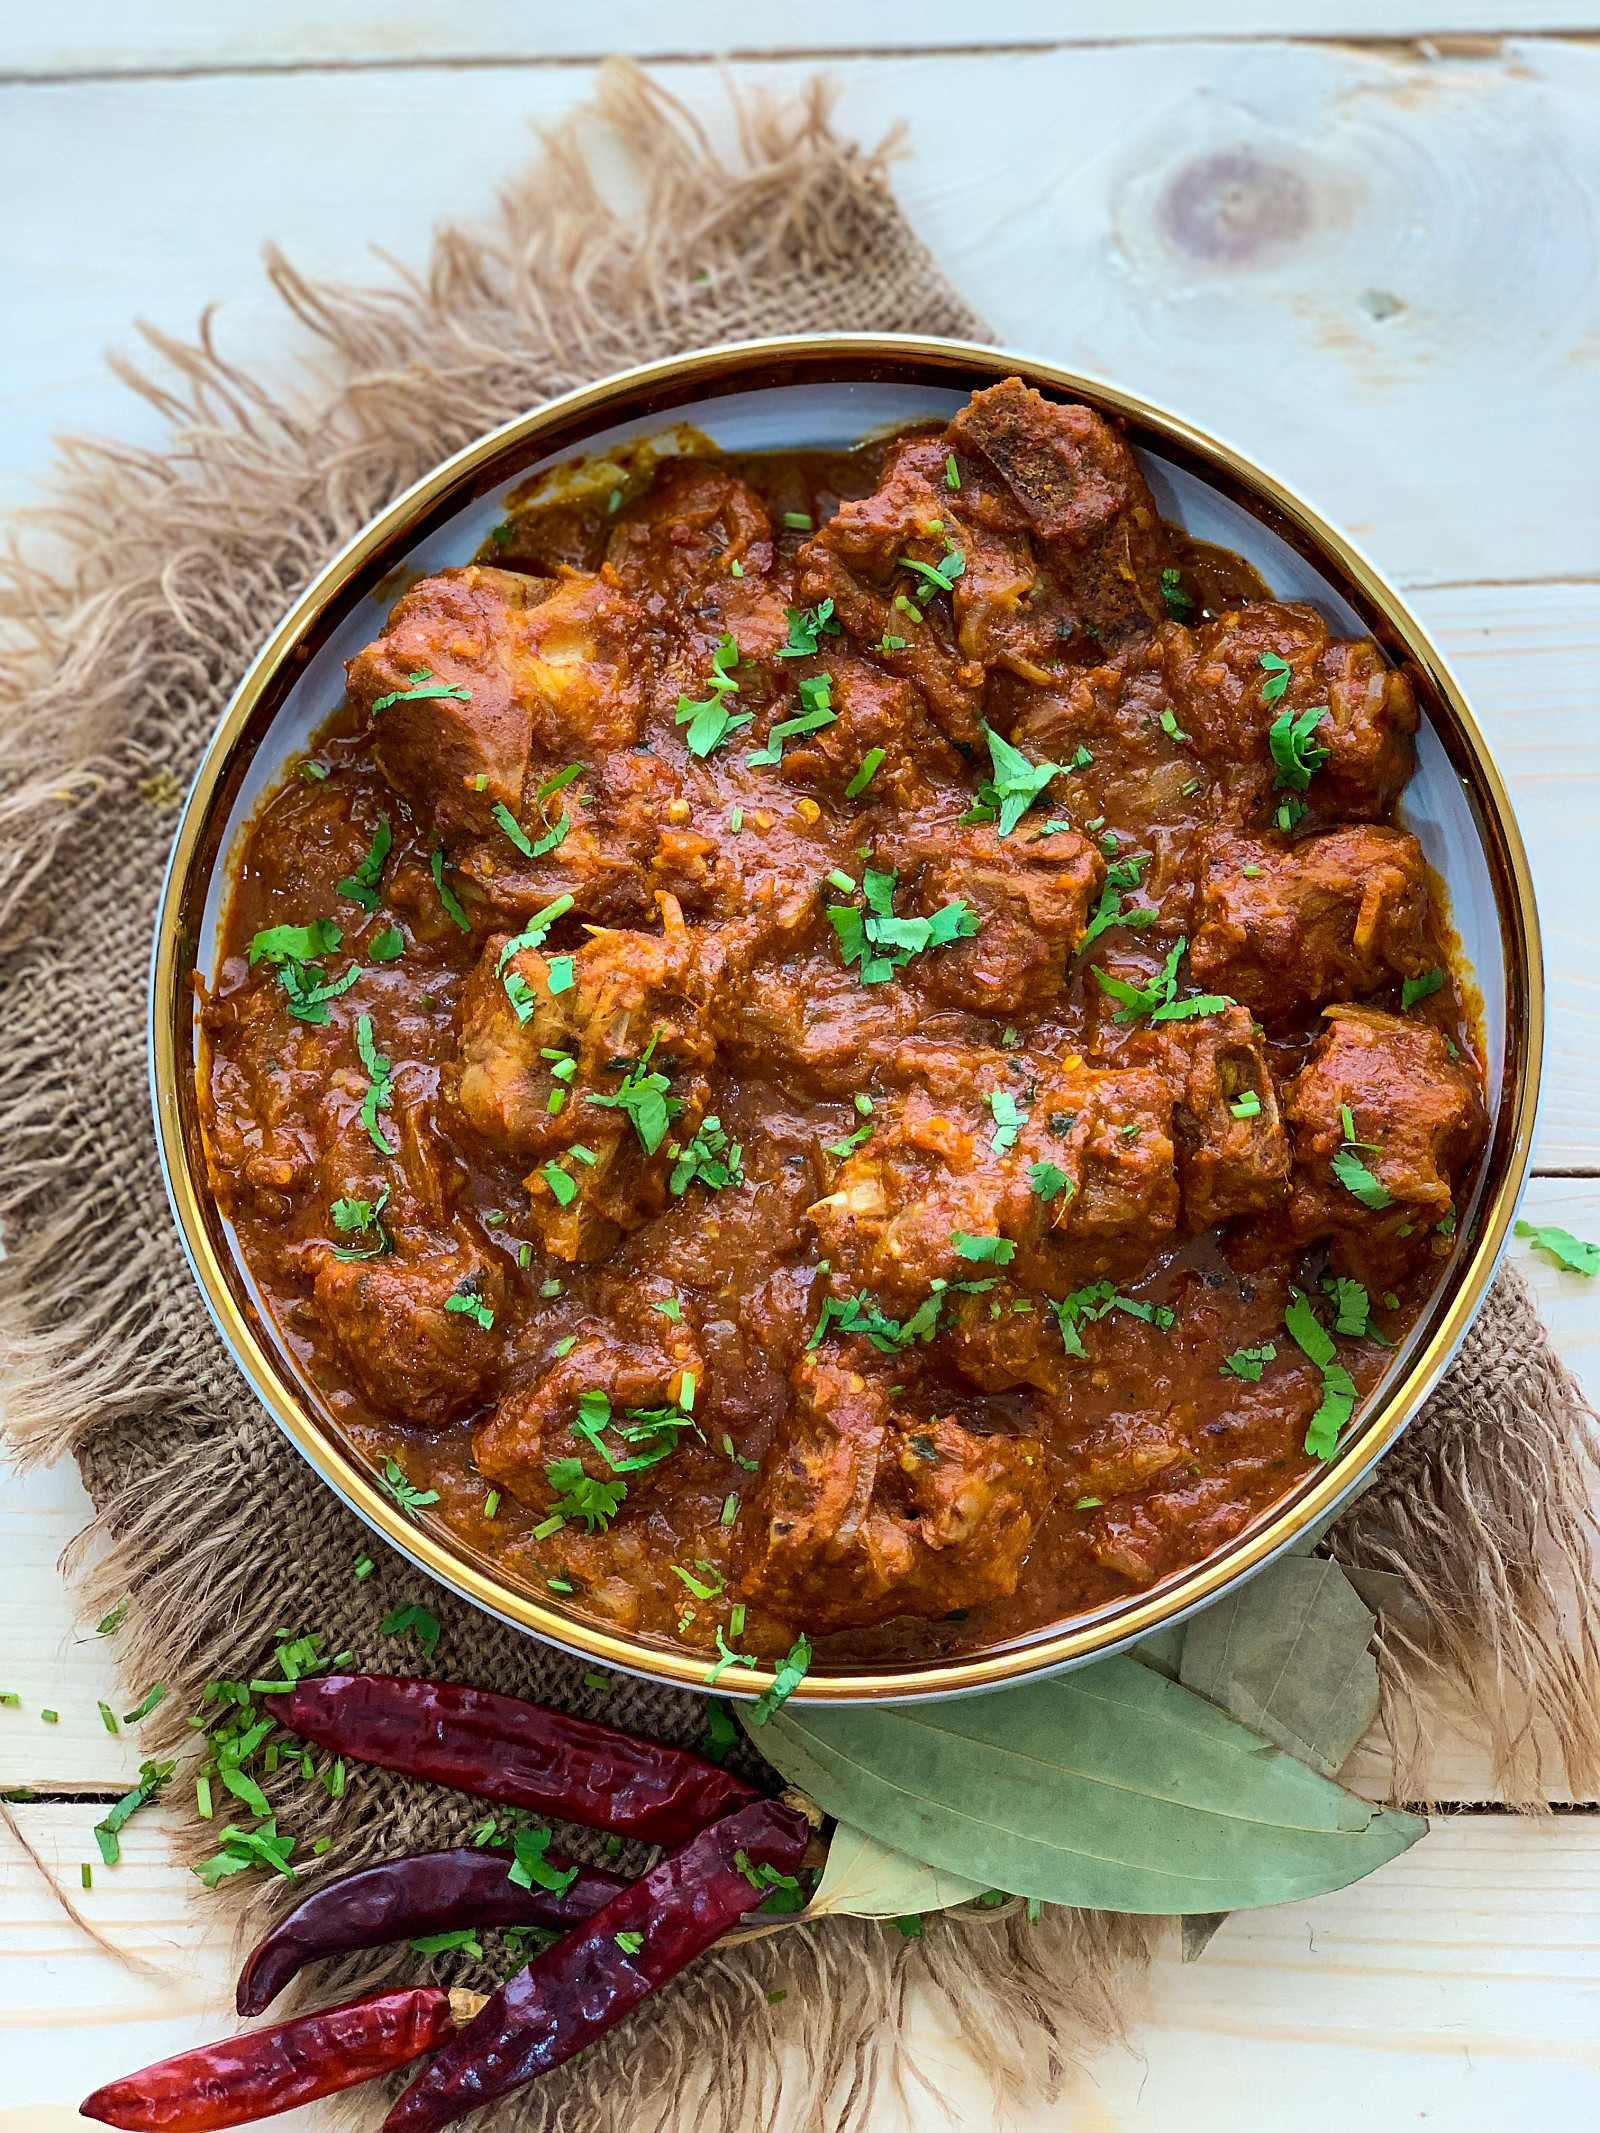 Rajasthani Laal Maas Recipe-Mutton In Red Spicy Gravy